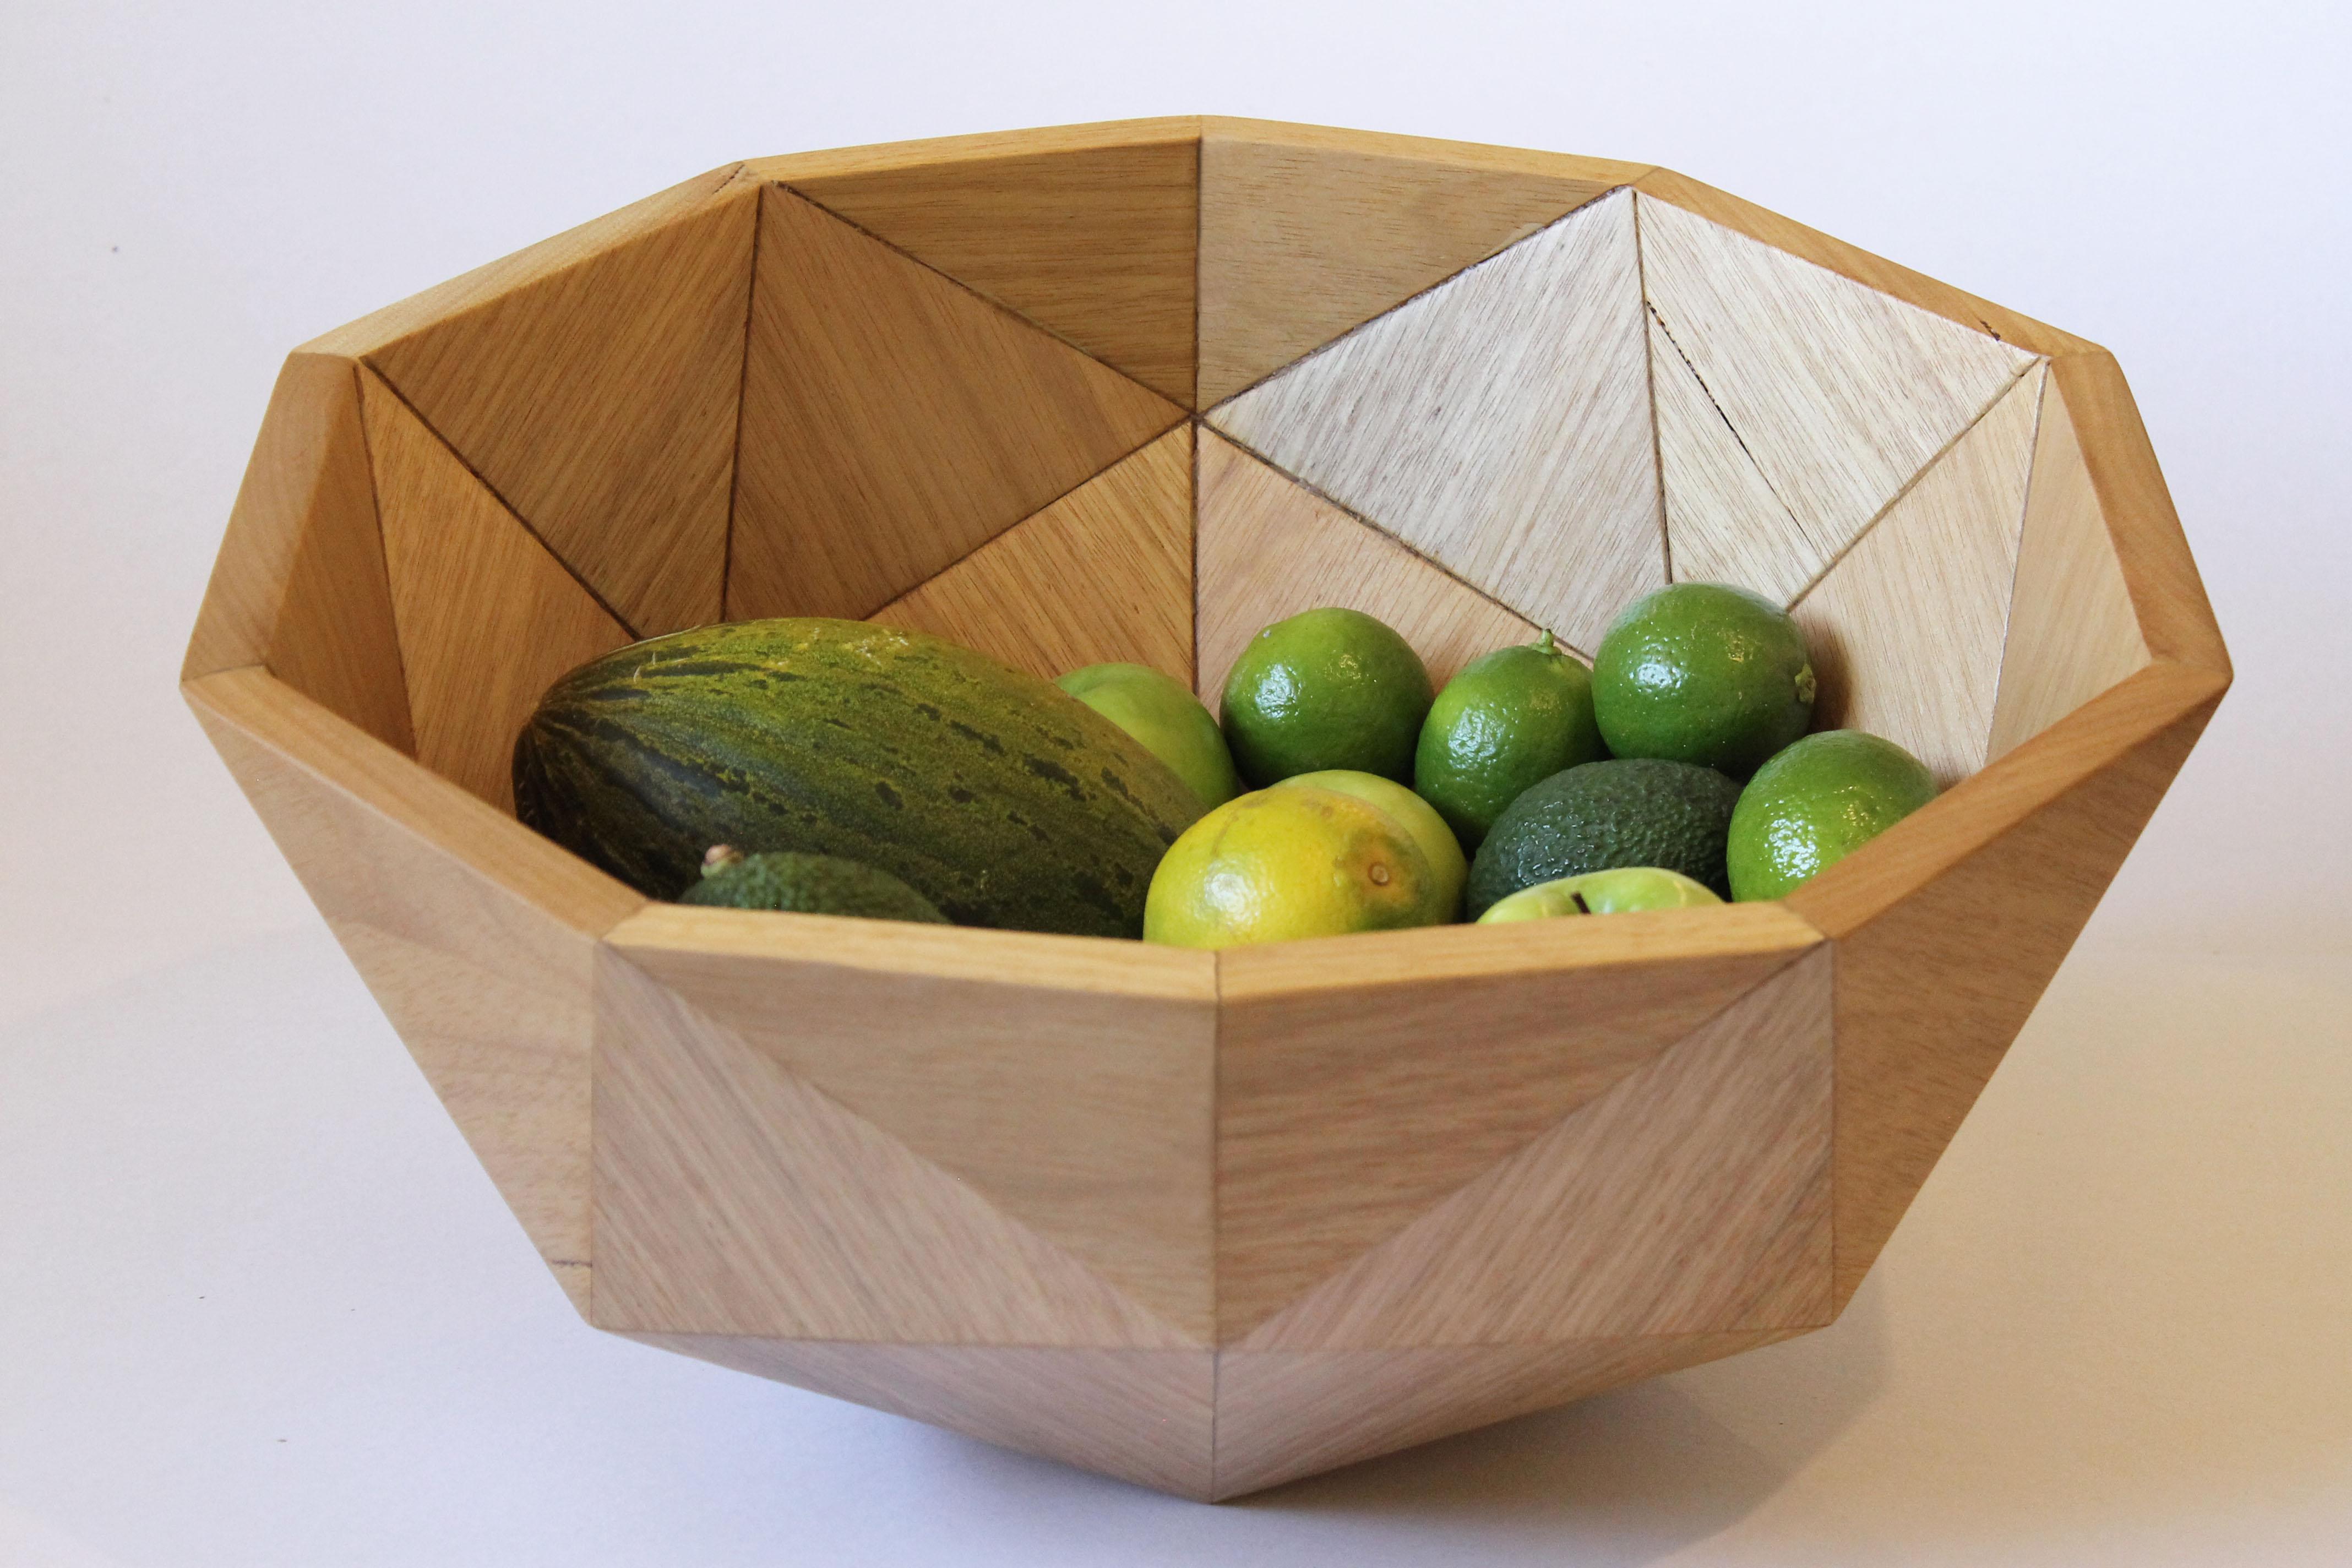 Inspired by geometry, it is composed of 32 triangular pieces that together form a geodesic. 
Entirely assembled by hand and made of certified Brazilian wood, it has non-toxic finish and can serve as either decorative element or fruit bowl. 